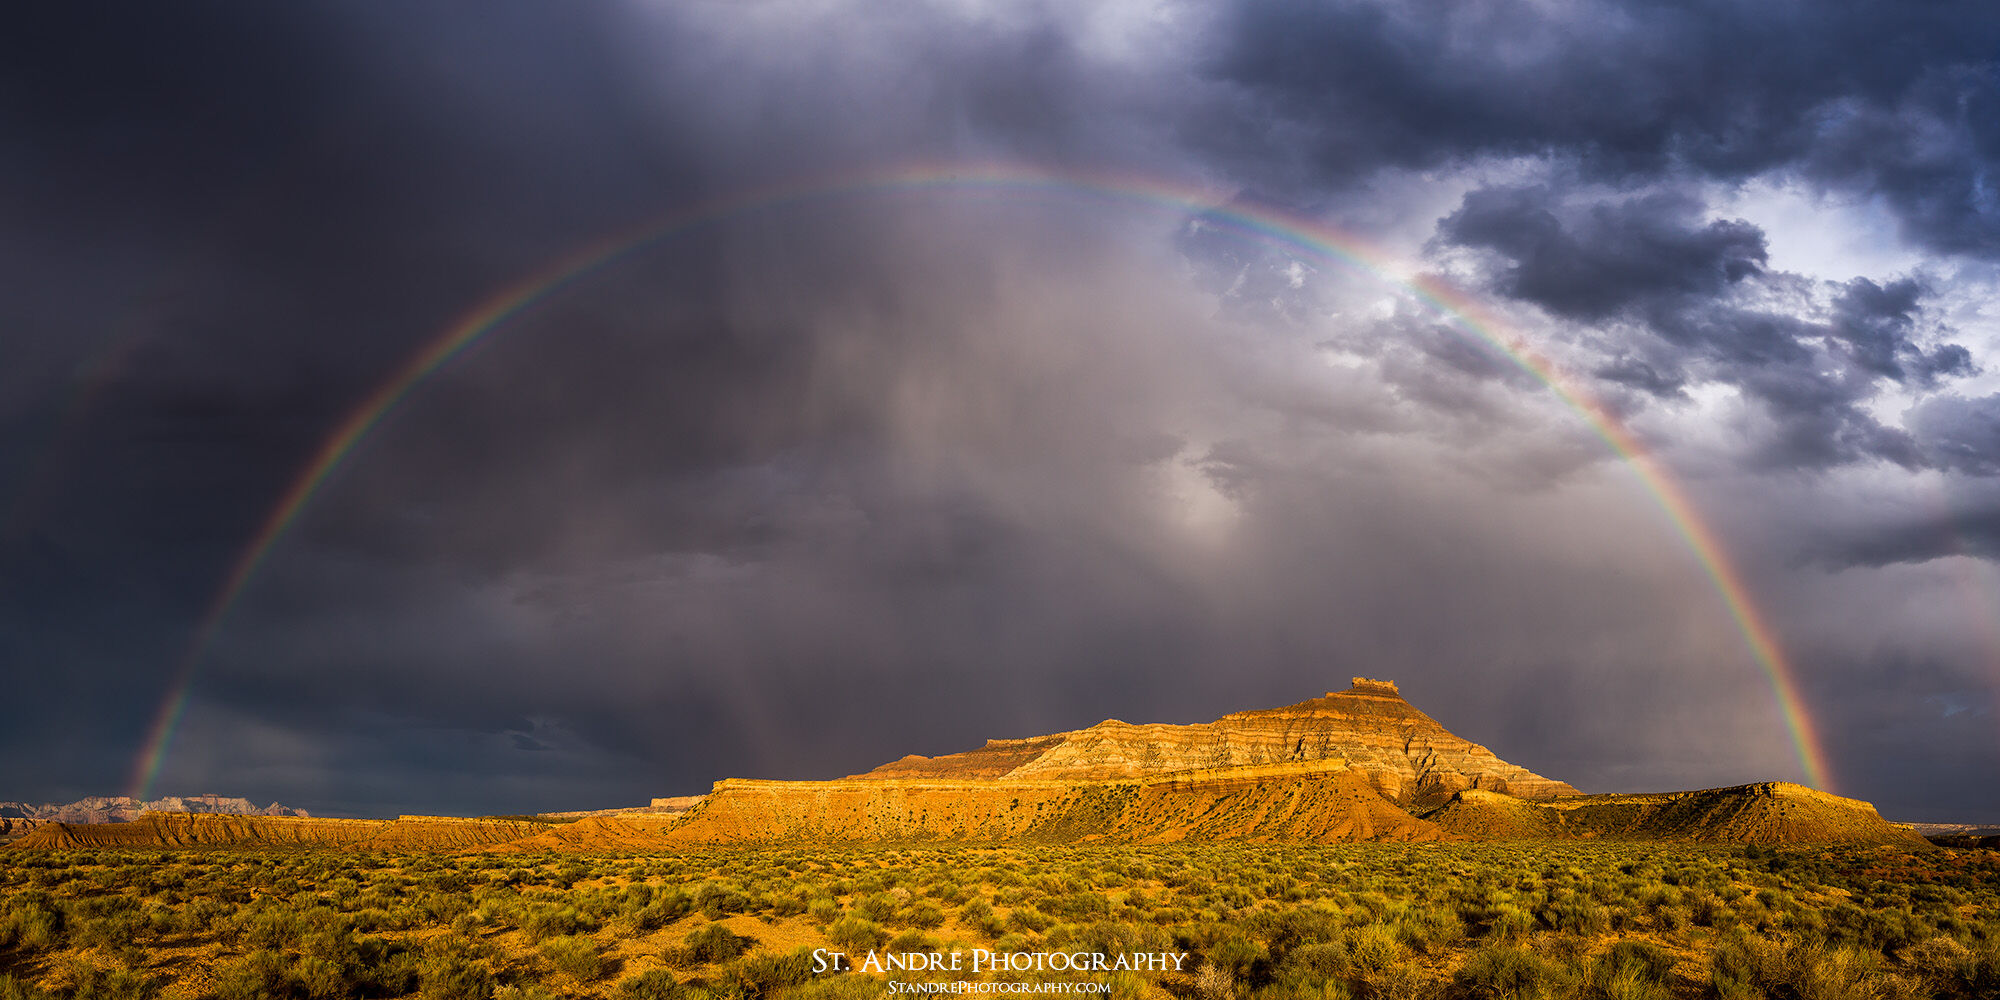 A large rainbow arches over Gooseberry mesa with the left side landing on the west temple of Zion and the right side resting on Gooseberry Mesa.